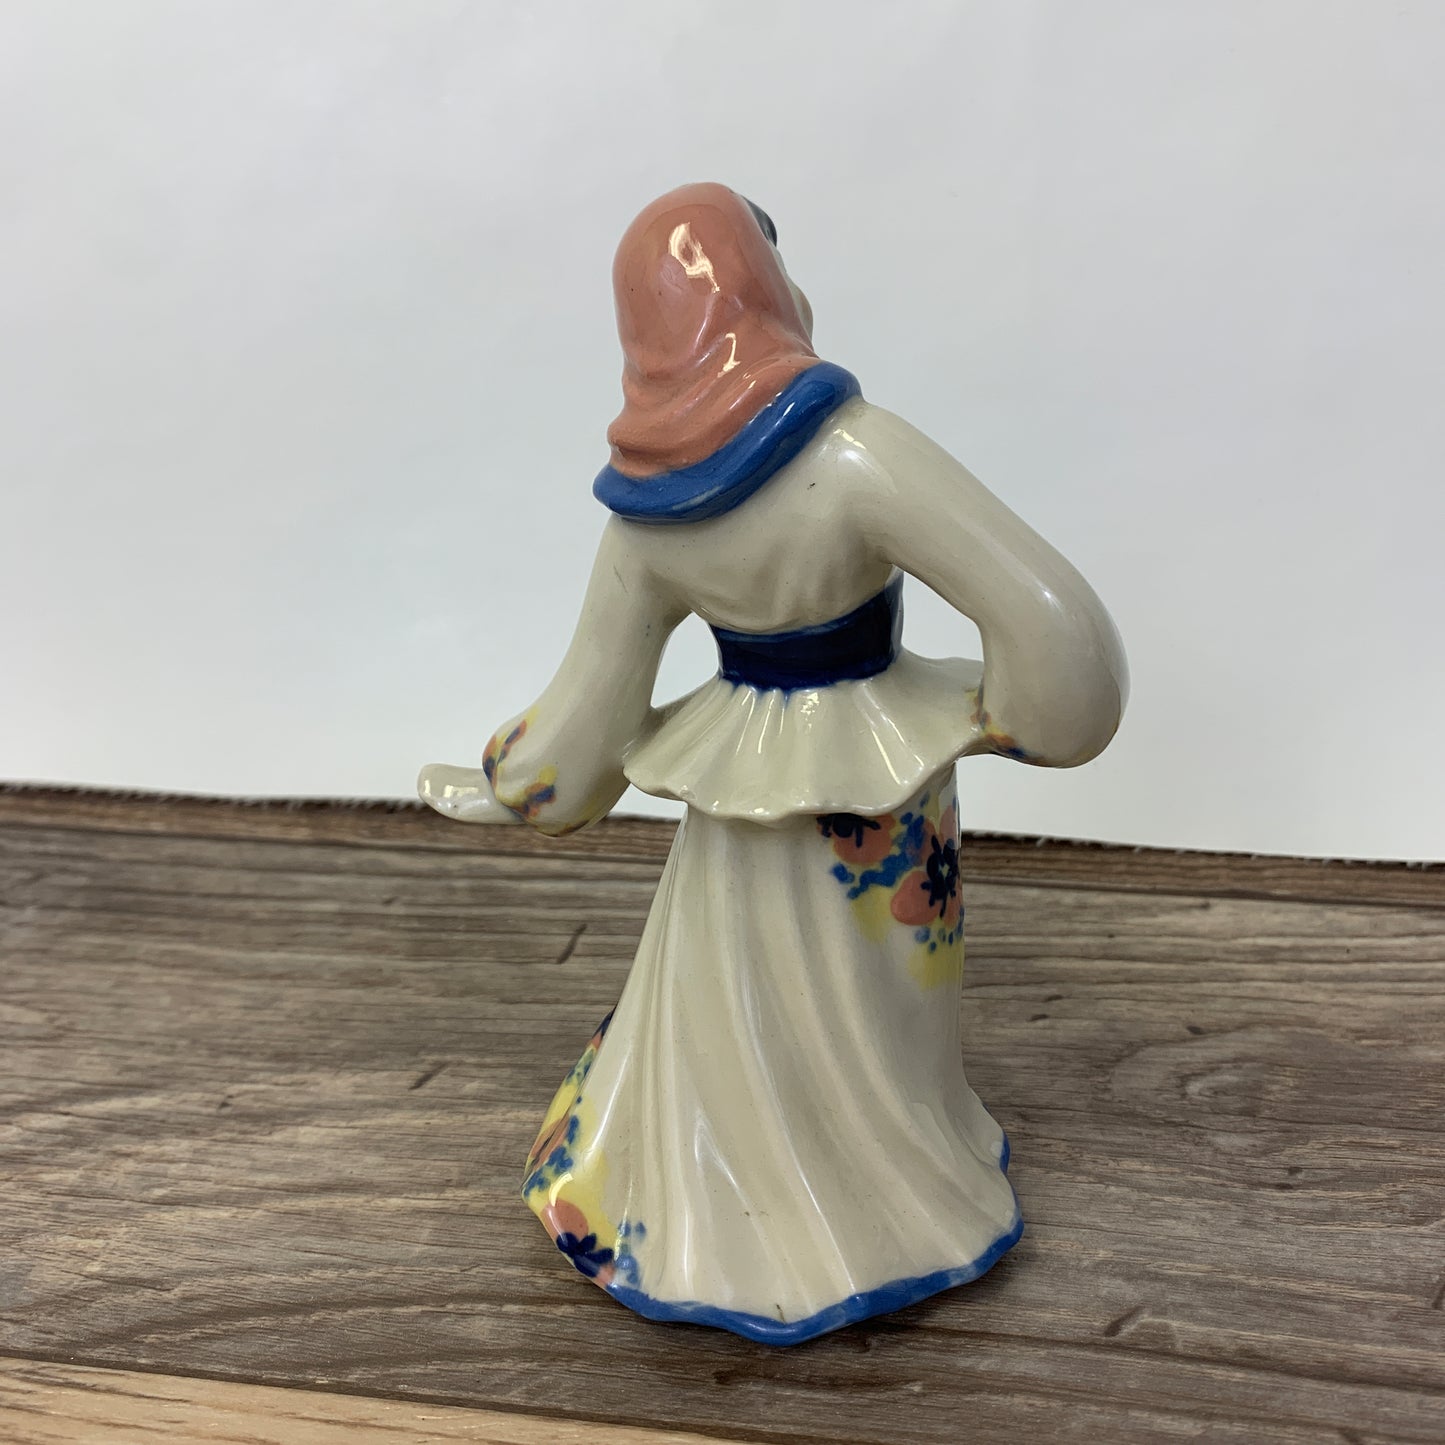 Vintage Ceramic Studios Dancing Girl, Hand Painted Ceramic Gypsy Figurine Pink and Blue